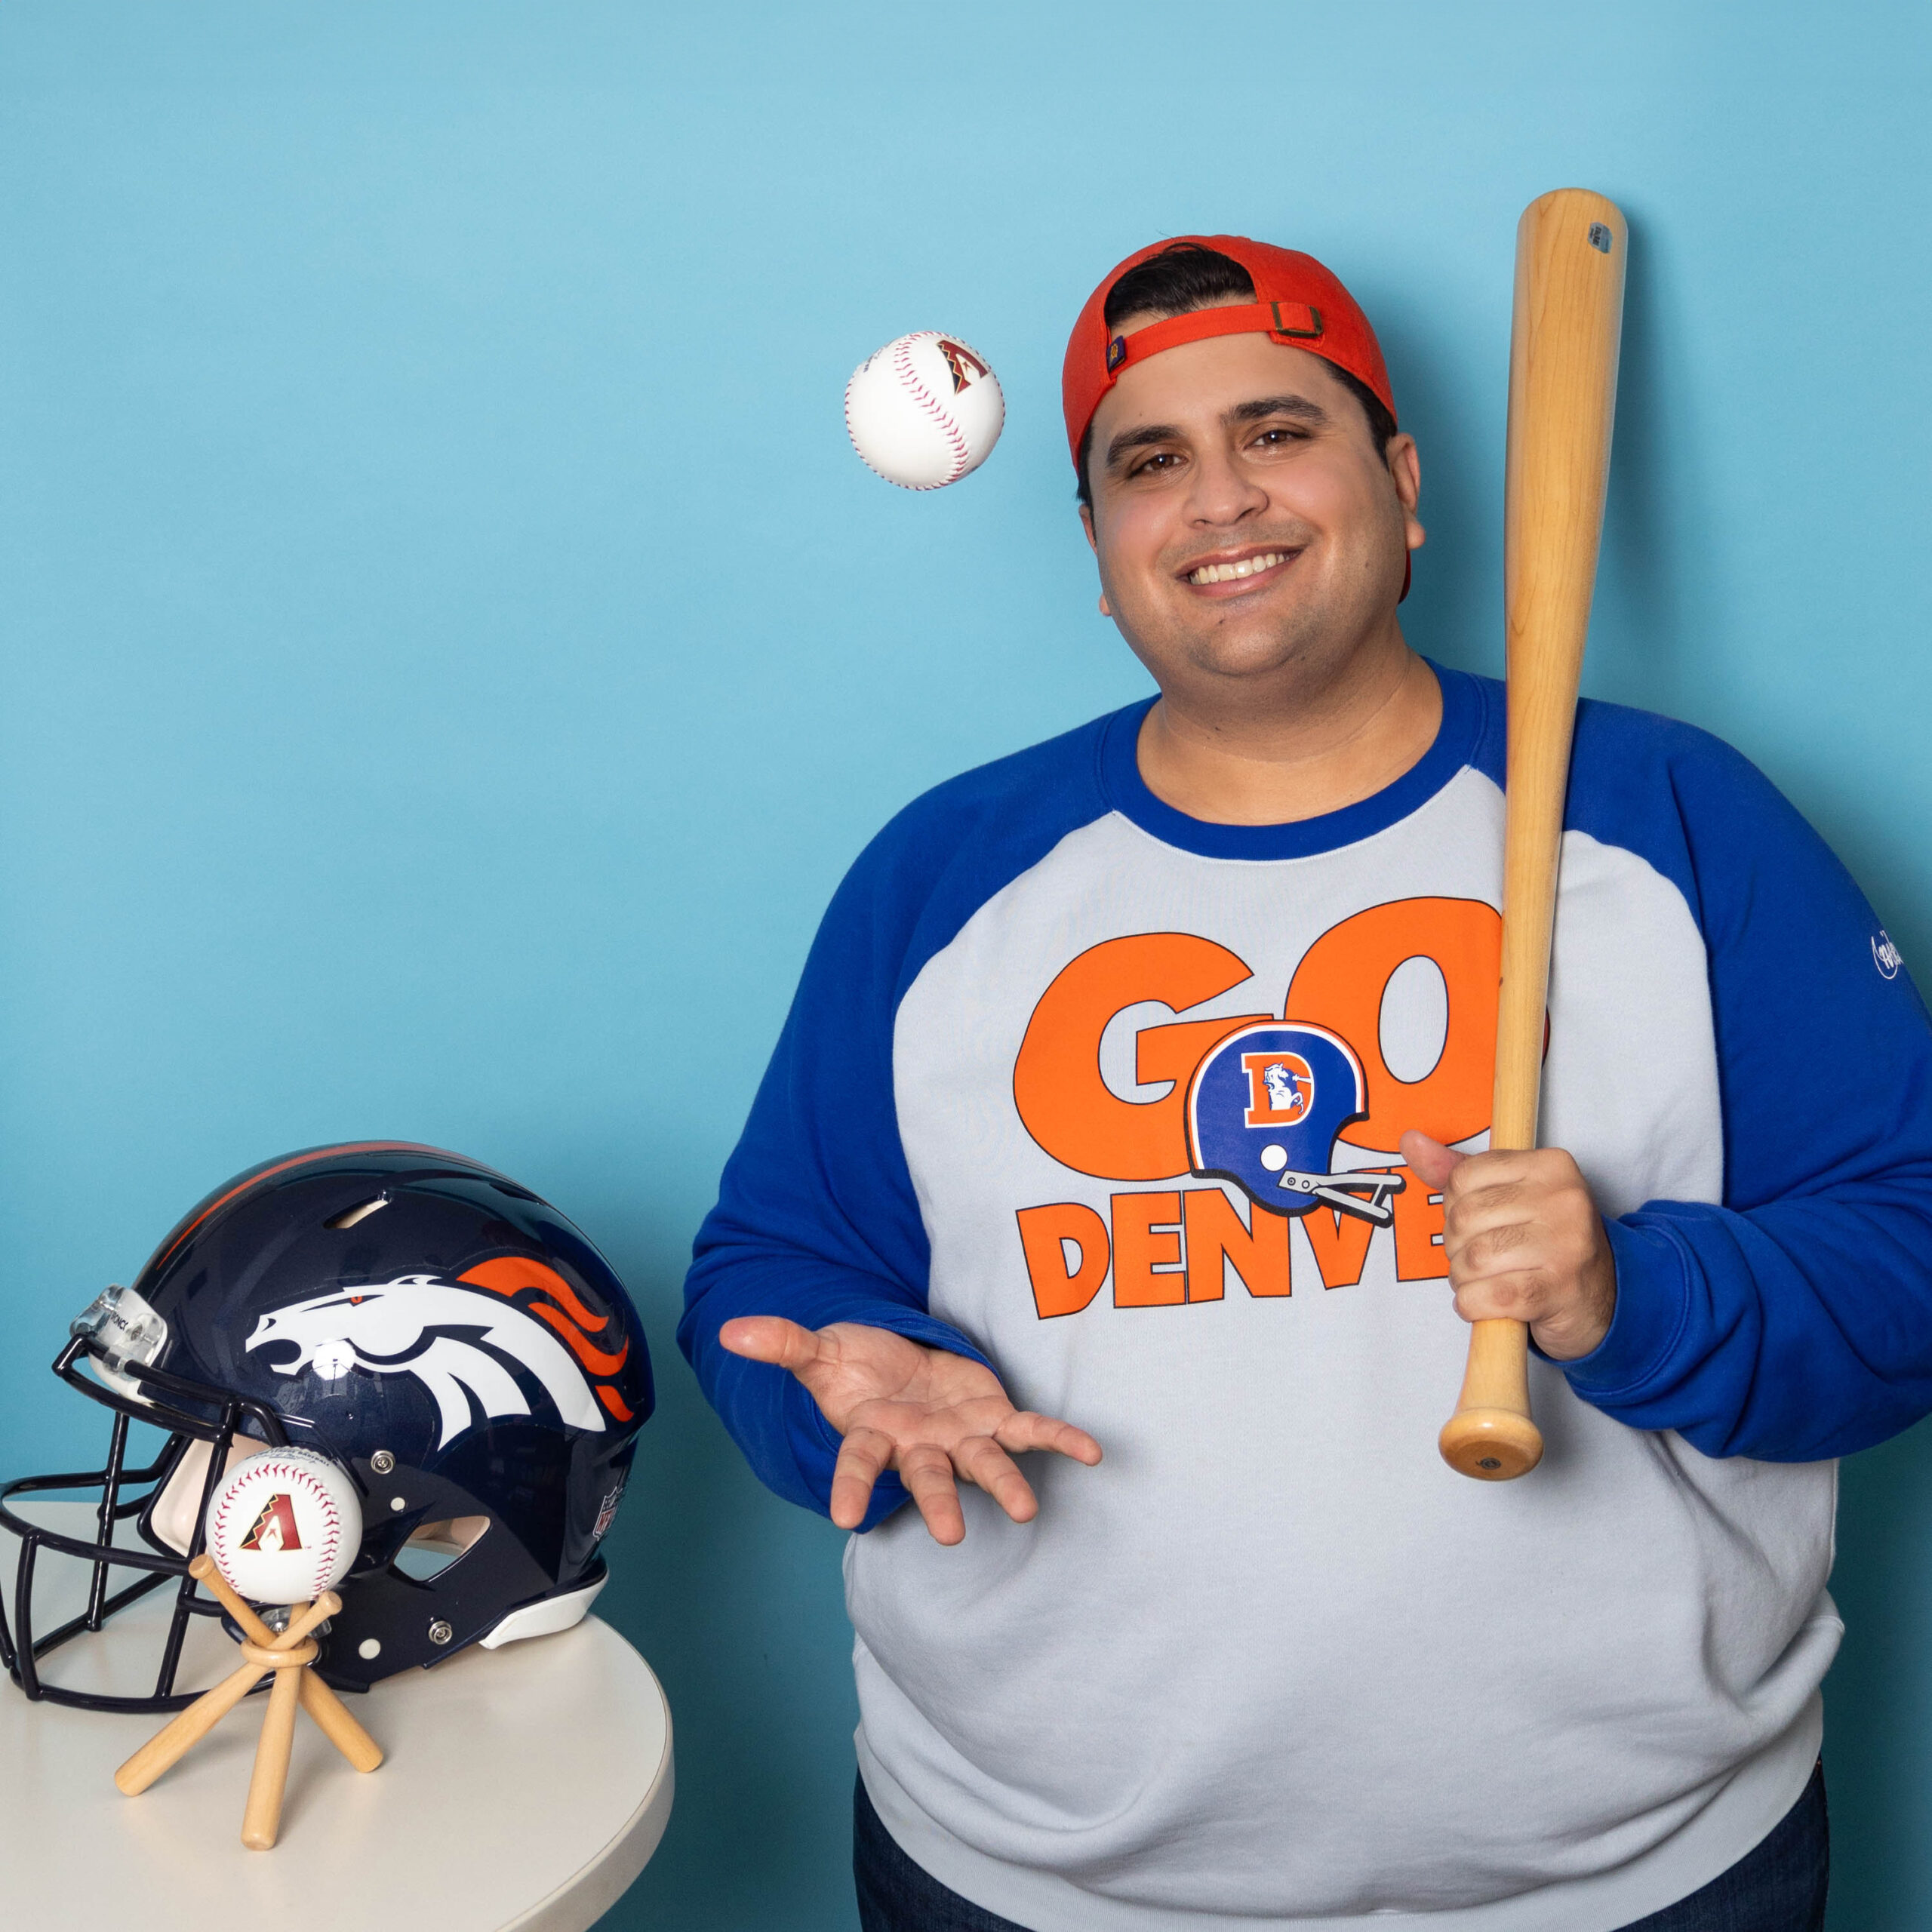 Headshot of a man in a baseball shirt and holding sports equipment